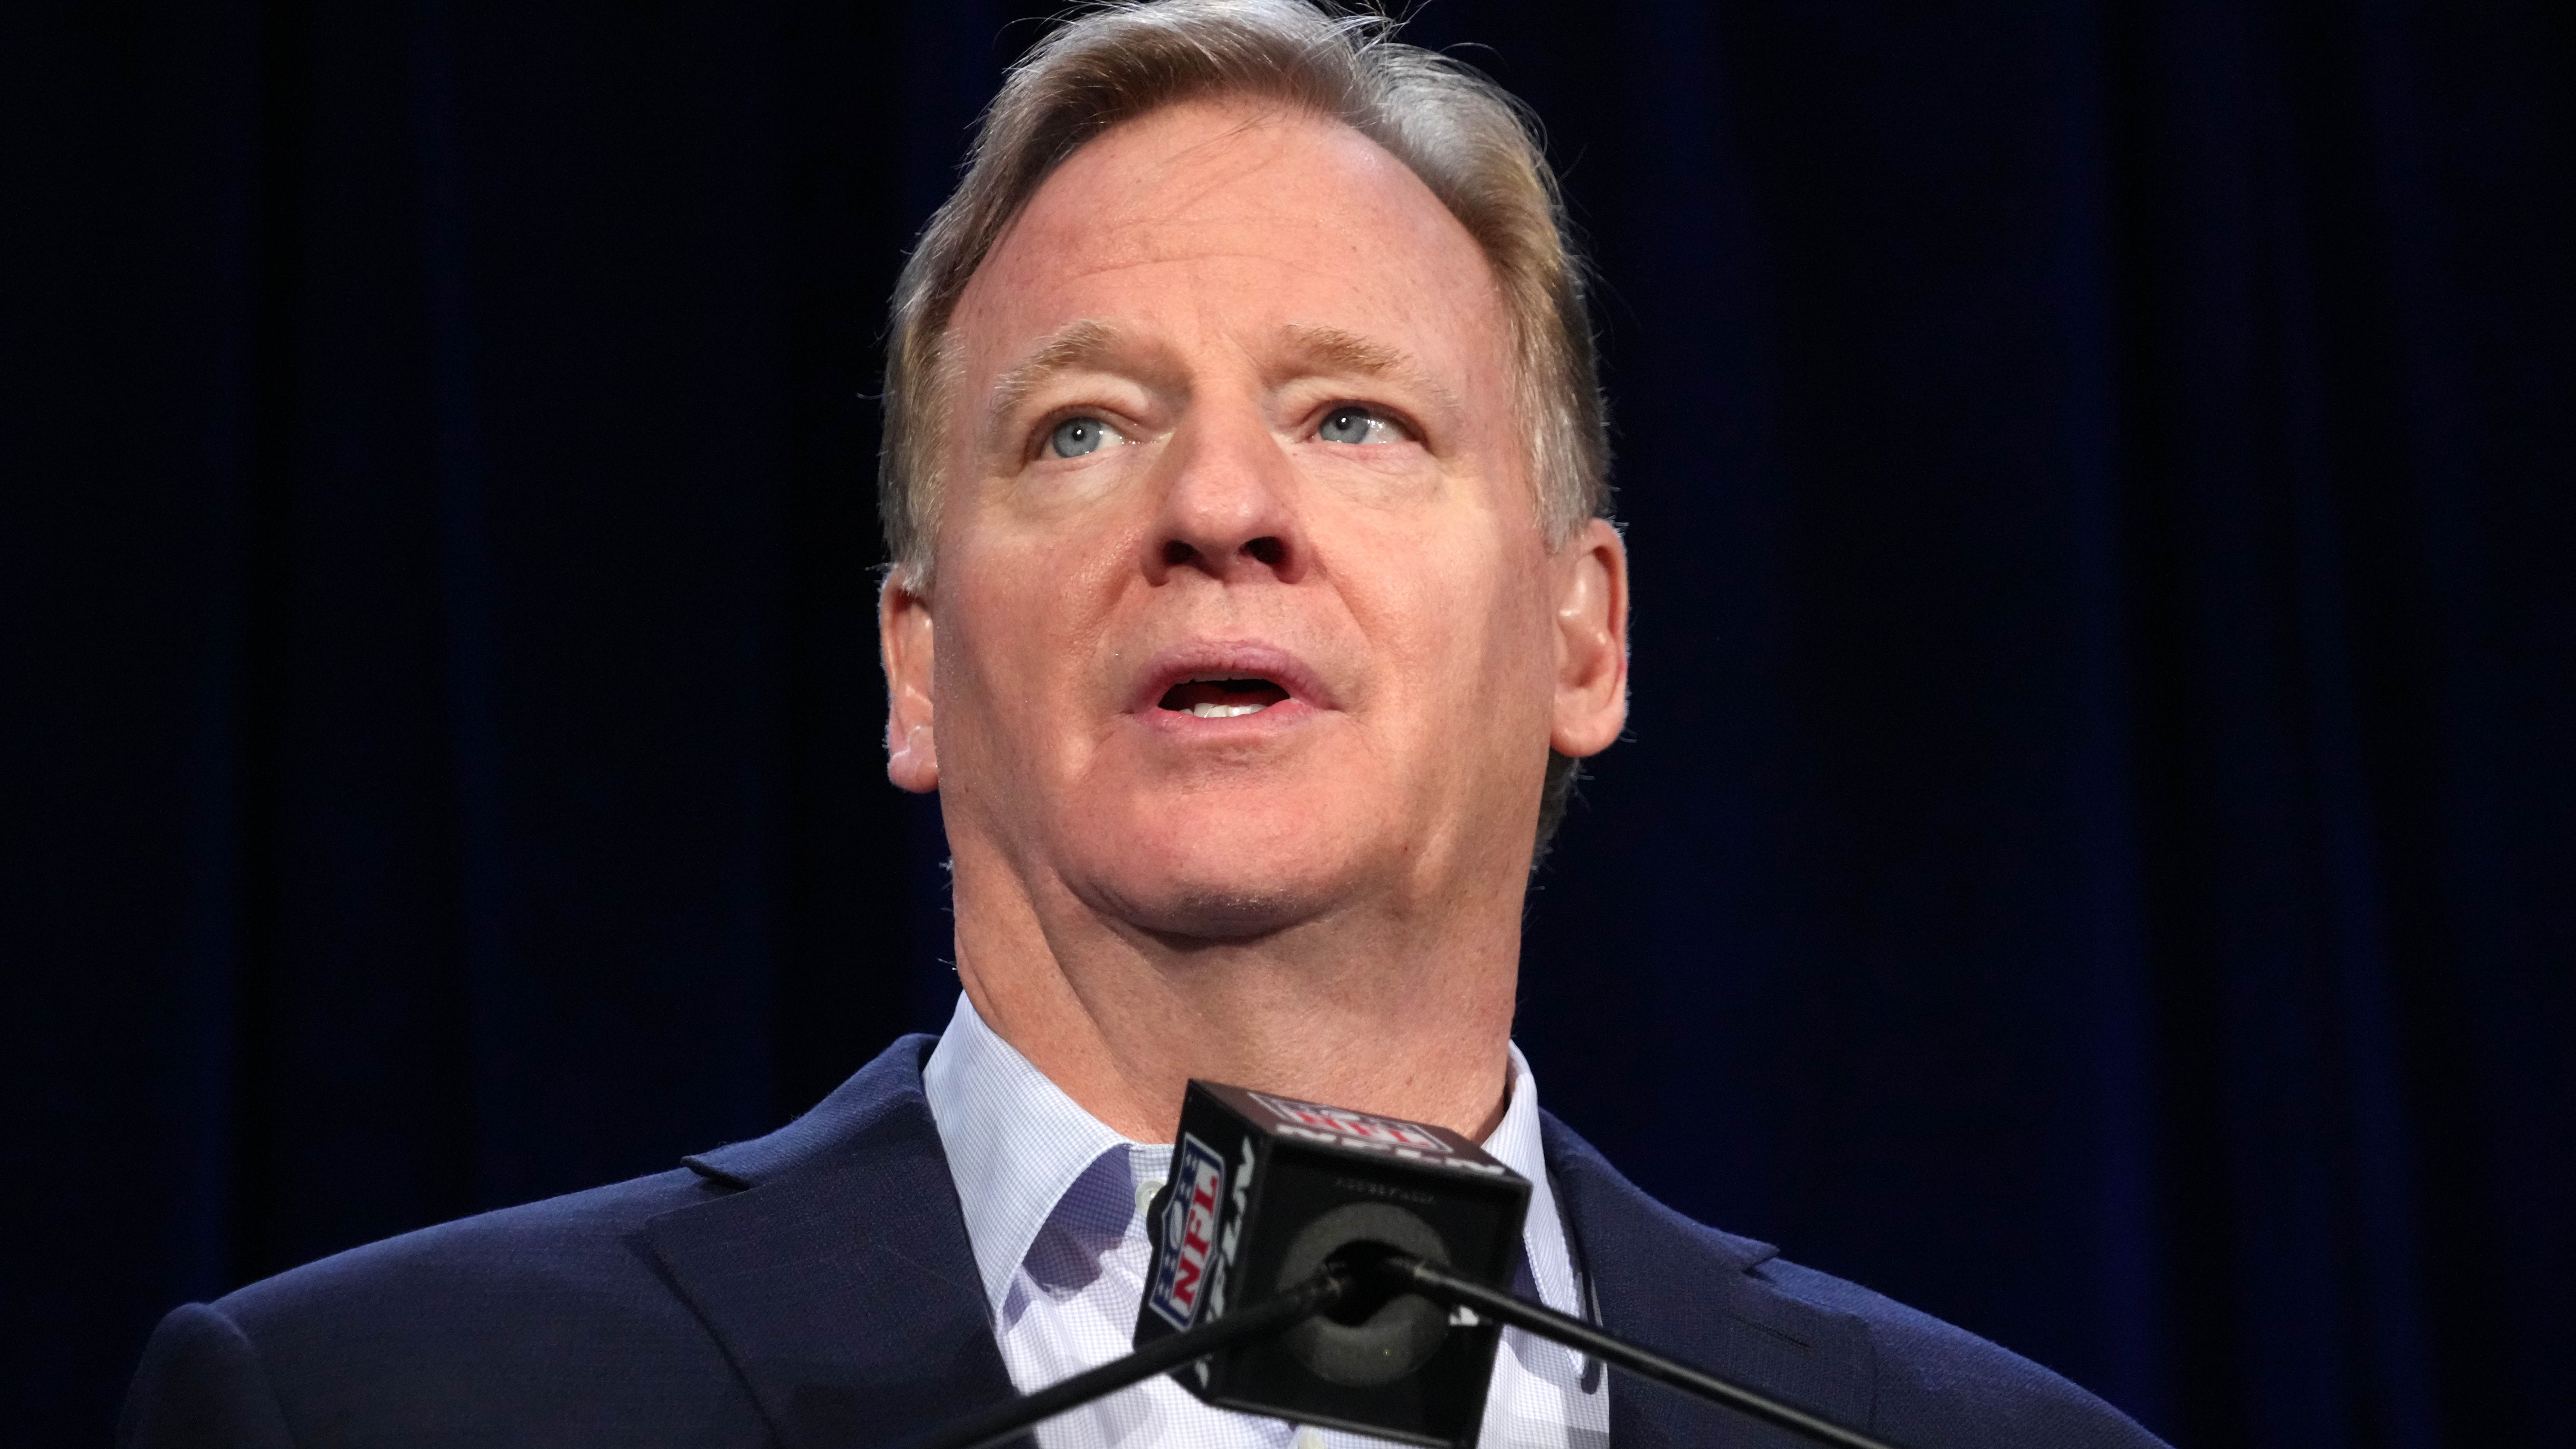 Feb 13, 2023; Phoenix, AZ, USA; NFL commissioner Roger Goodell speaks during the Super Bowl 57 Winning Team Head Coach and MVP press conference at the Phoenix Convention Center.